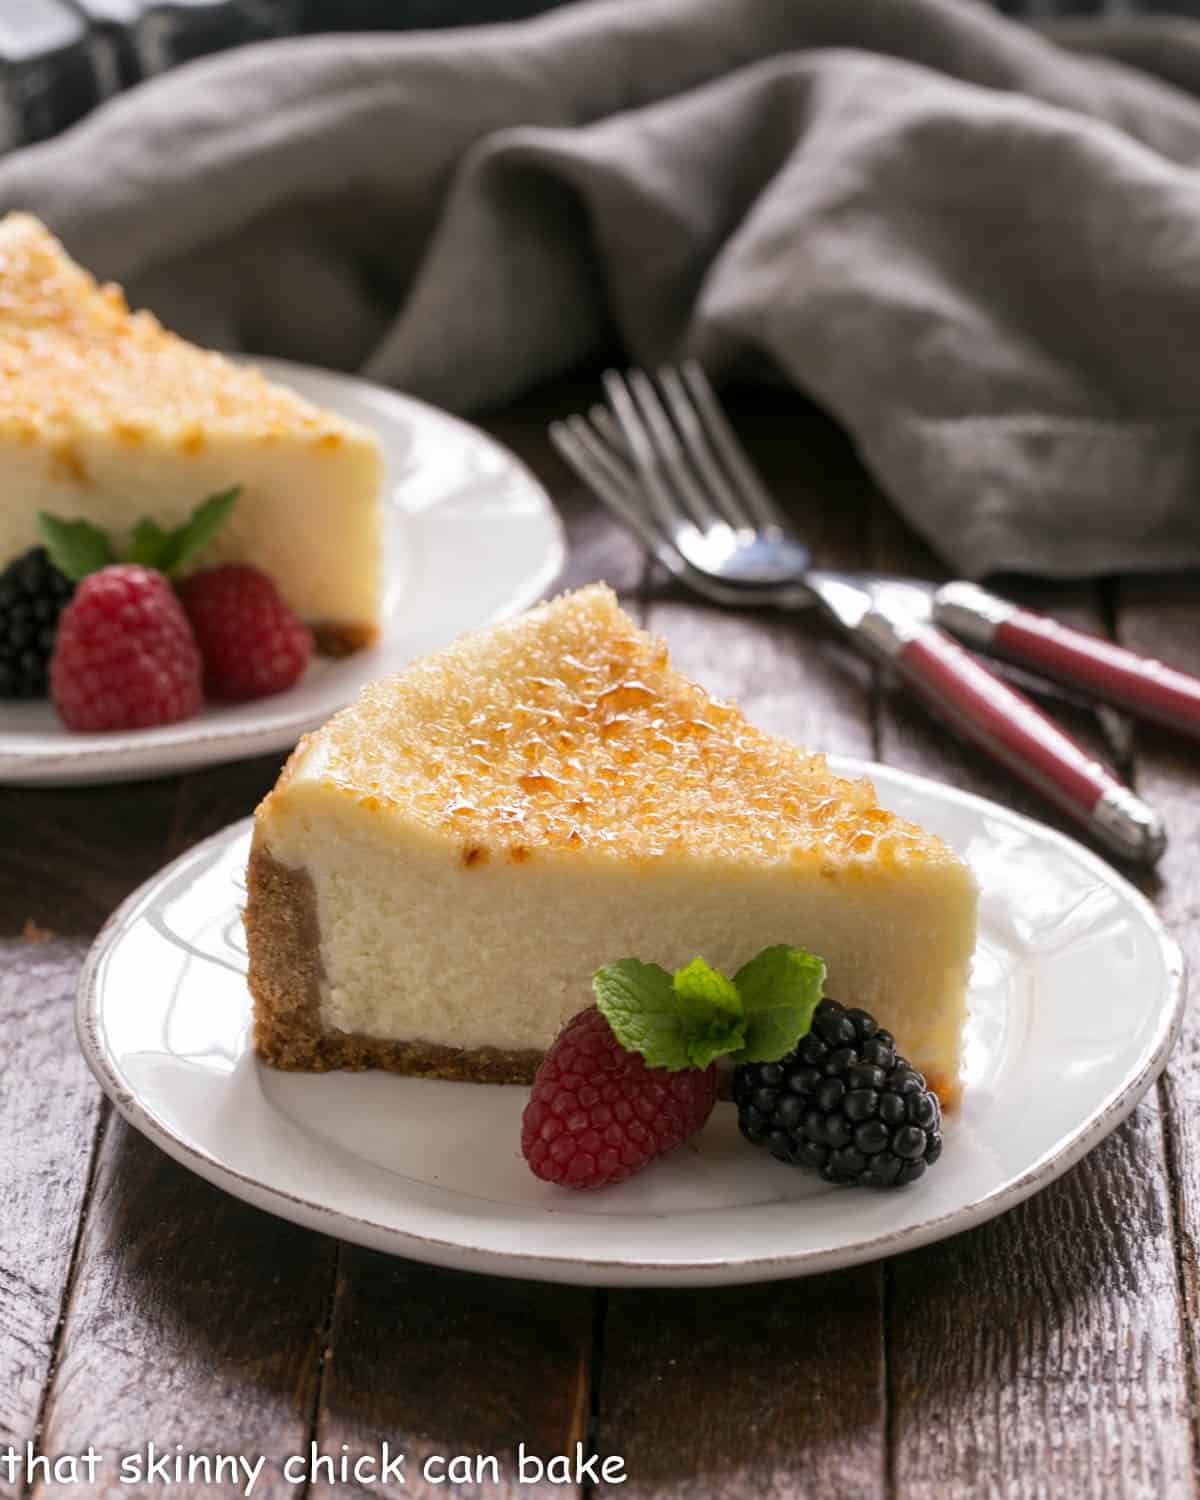 Two slices of creme brulee cheesecake on white plates with berry garnish.